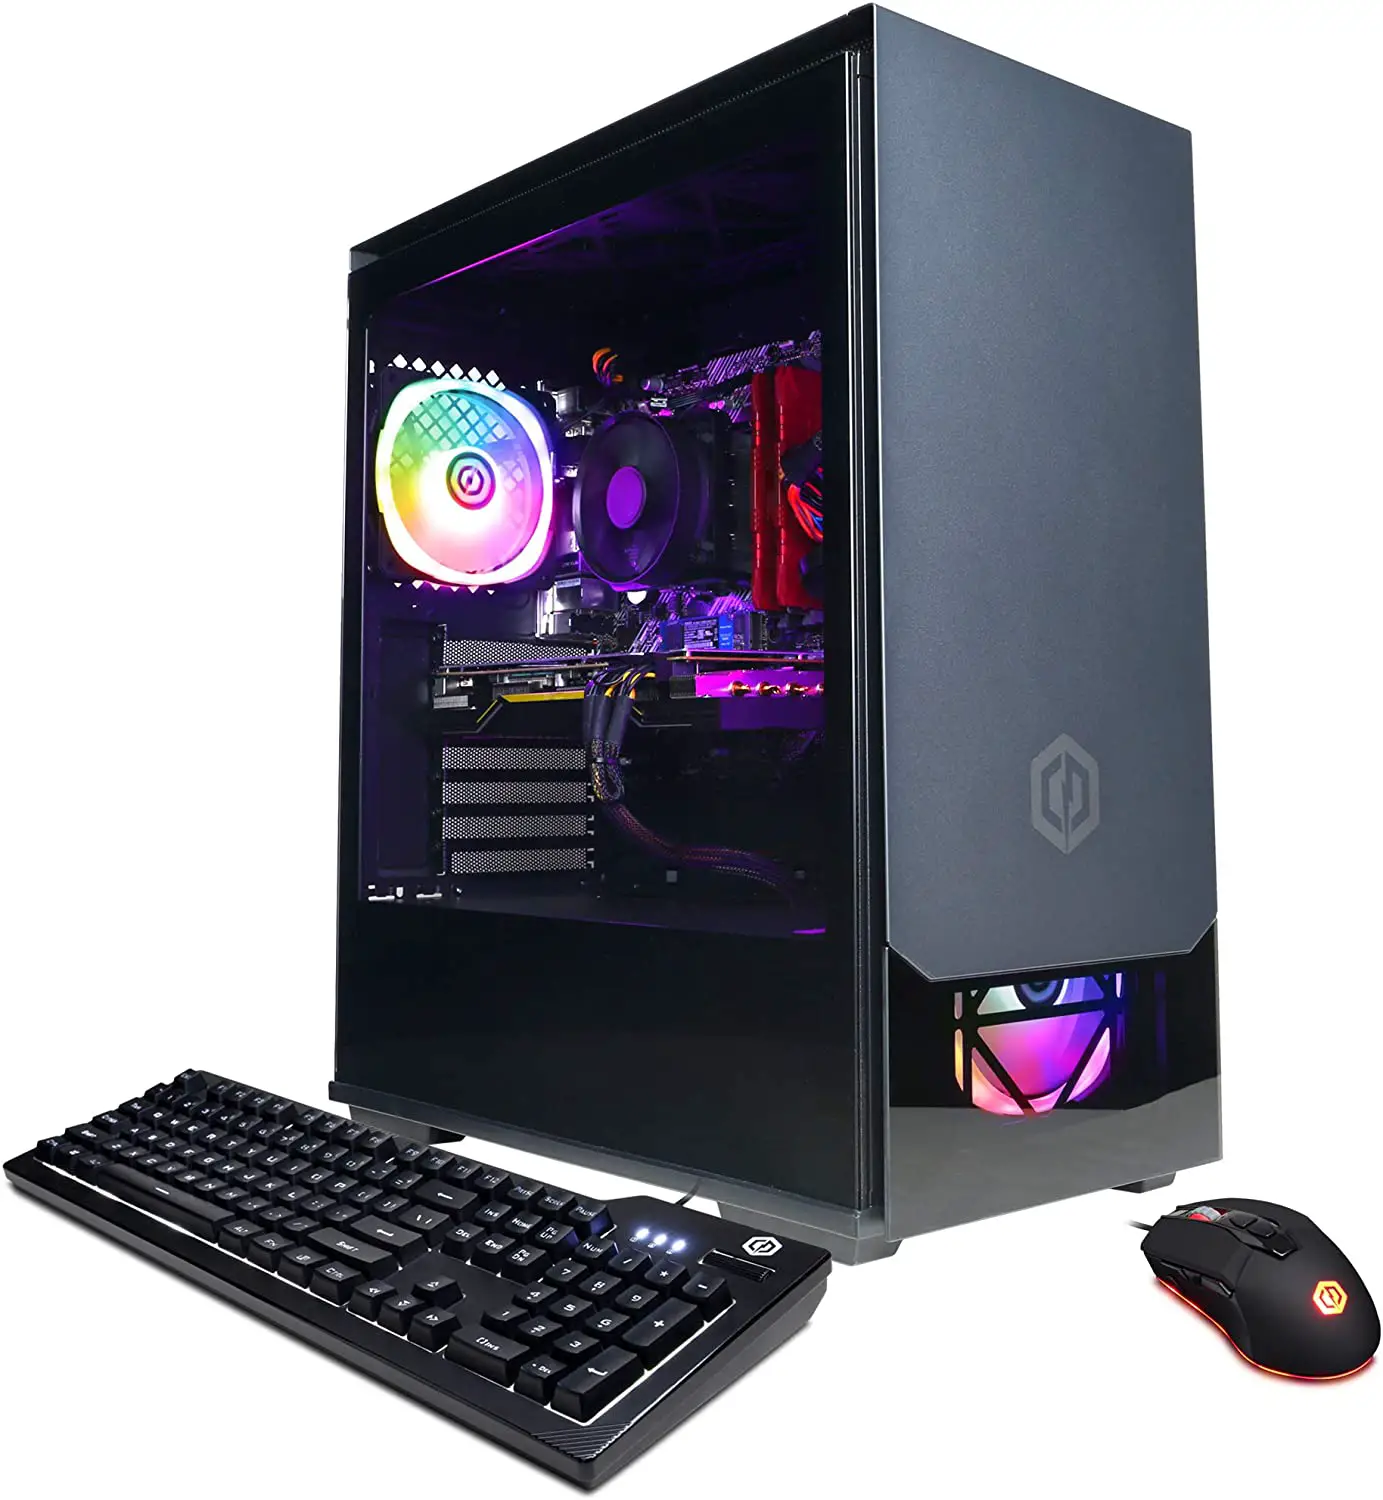  CYBERPOWERPC Gamer Master GMA890A Gaming PC - is it worth buying
